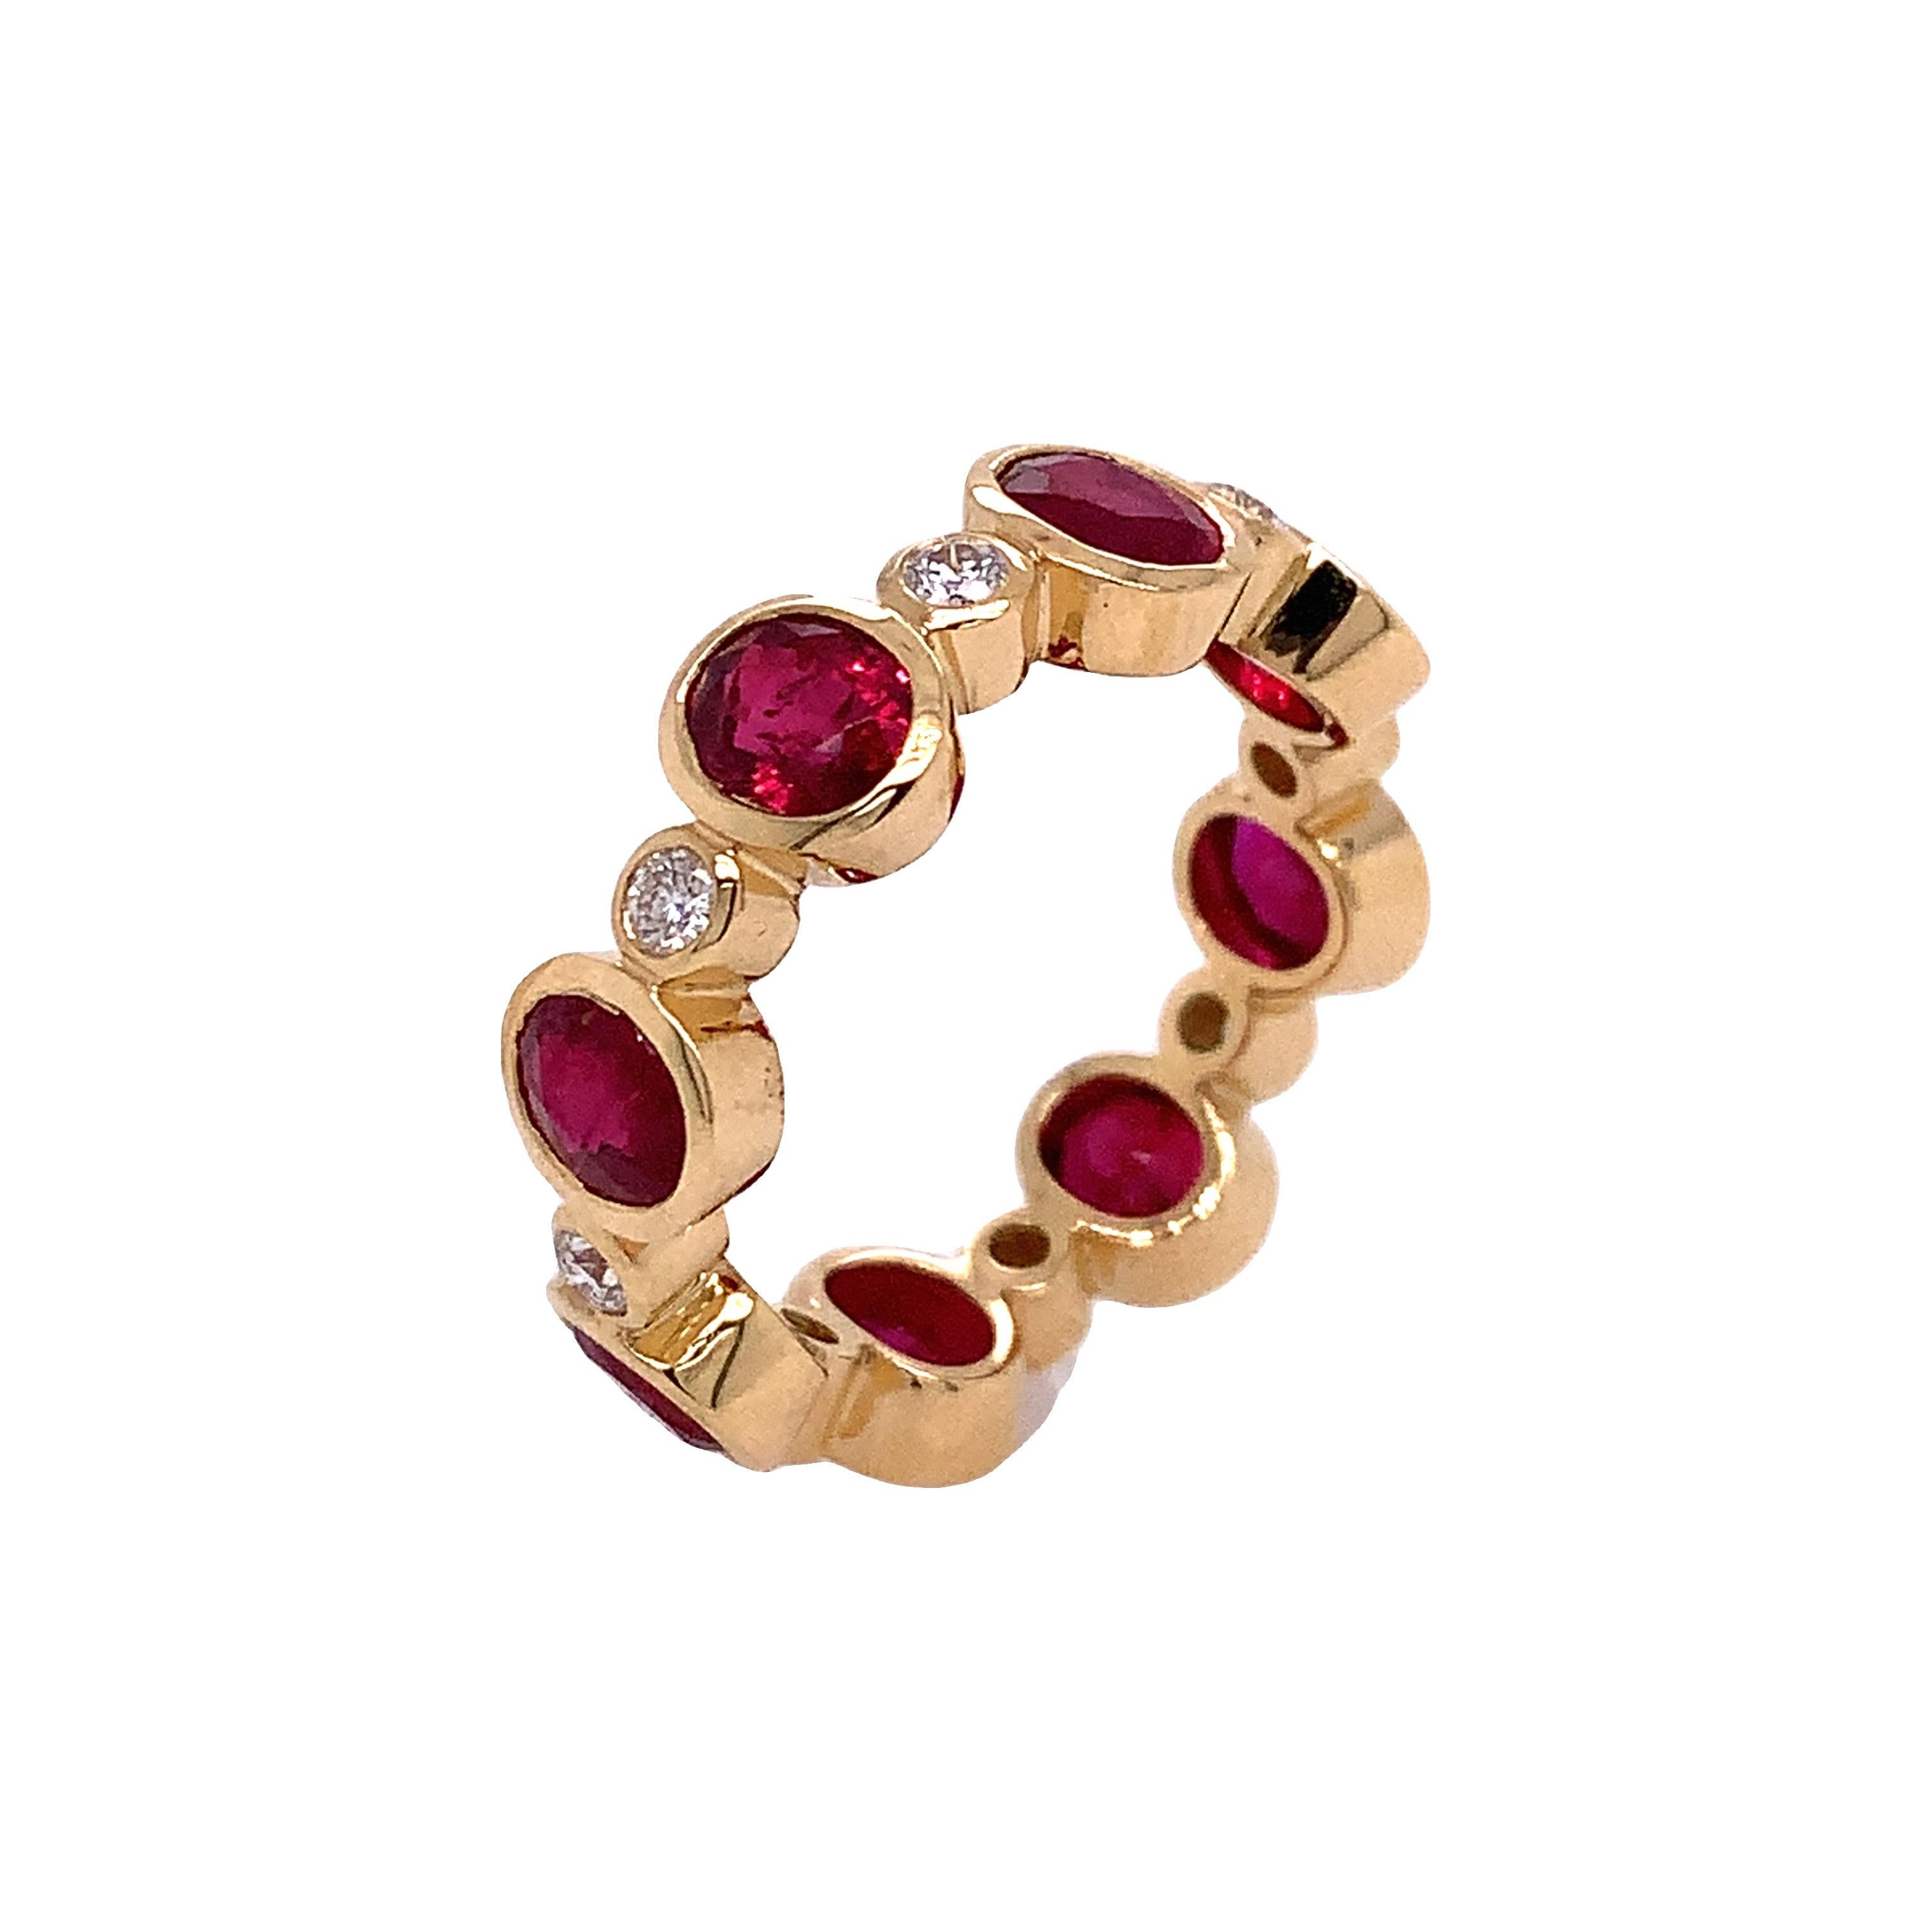 18K Yellow Gold
Ruby: 4.04ct total weight
Diamond: 0.29ct total weight
All diamonds are G-H/ SI stones